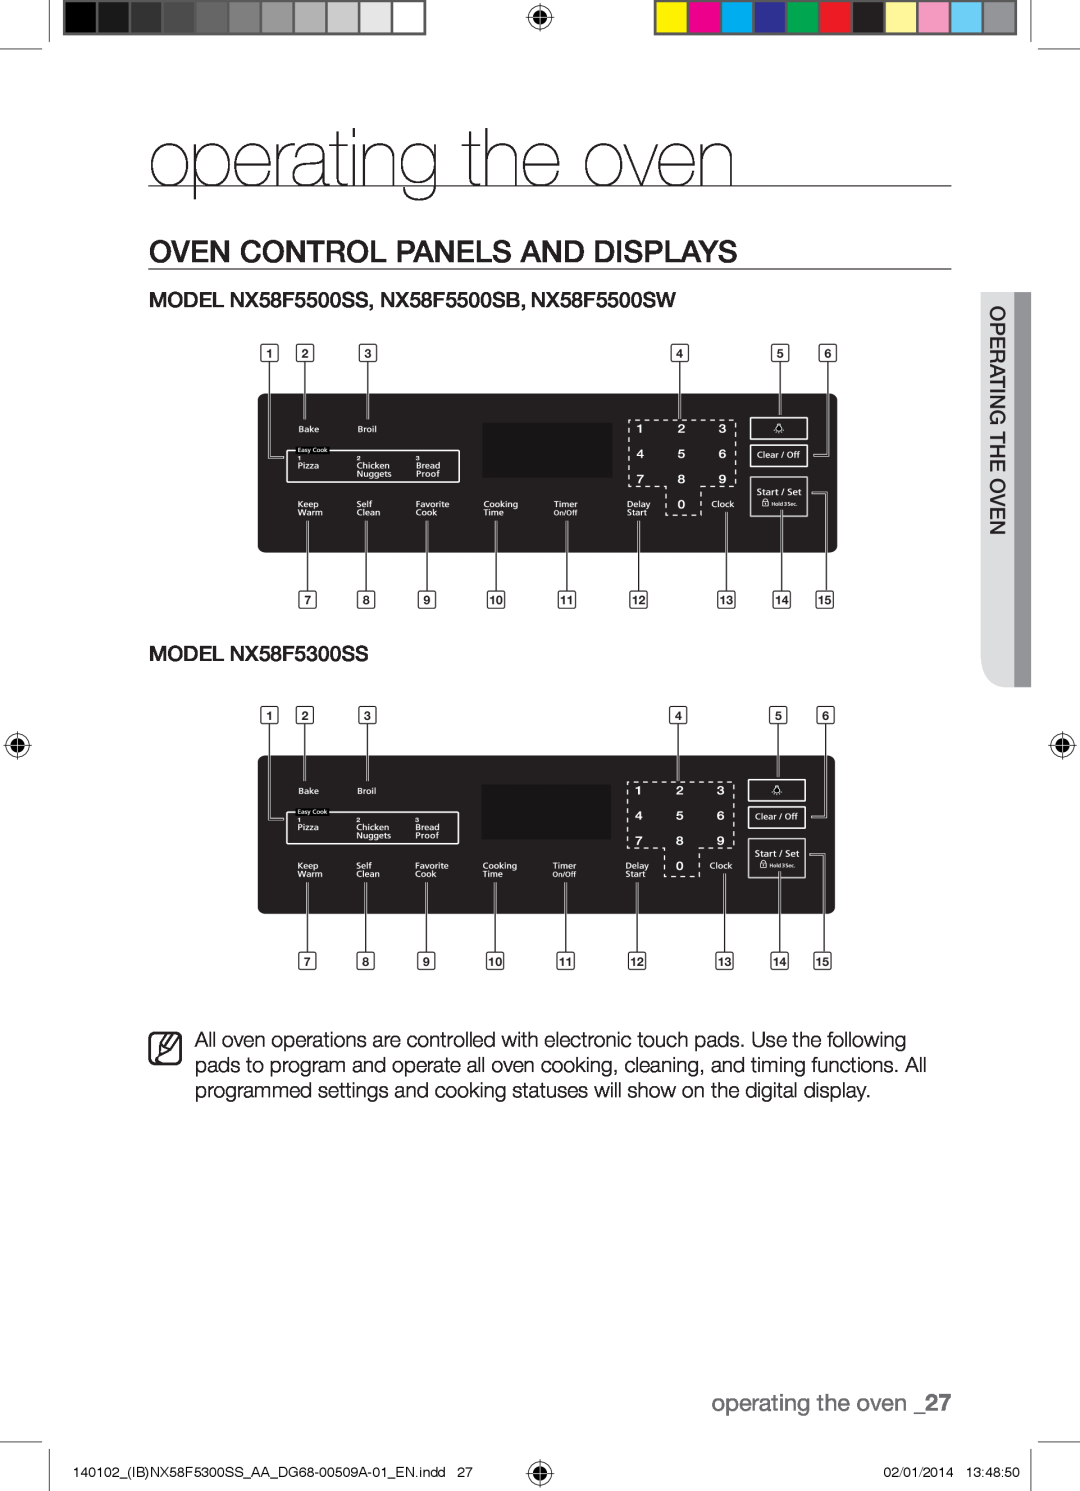 Samsung NX58F5500SW user manual operating the oven, Oven Control Panels And Displays 